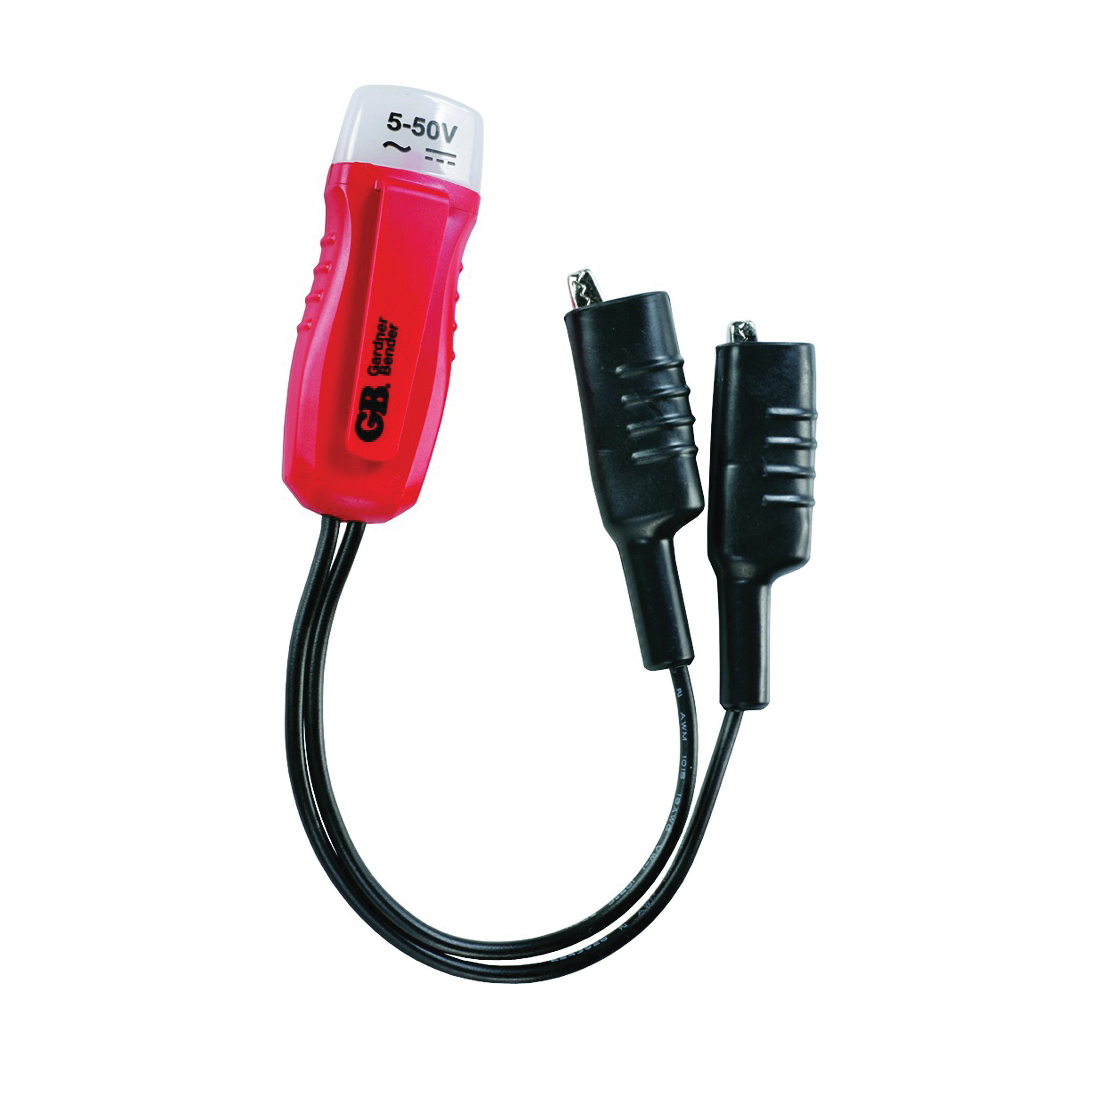 GET-3202 Twin Probe Circuit Tester, 5 to 50 V, Functions: Voltage, Red